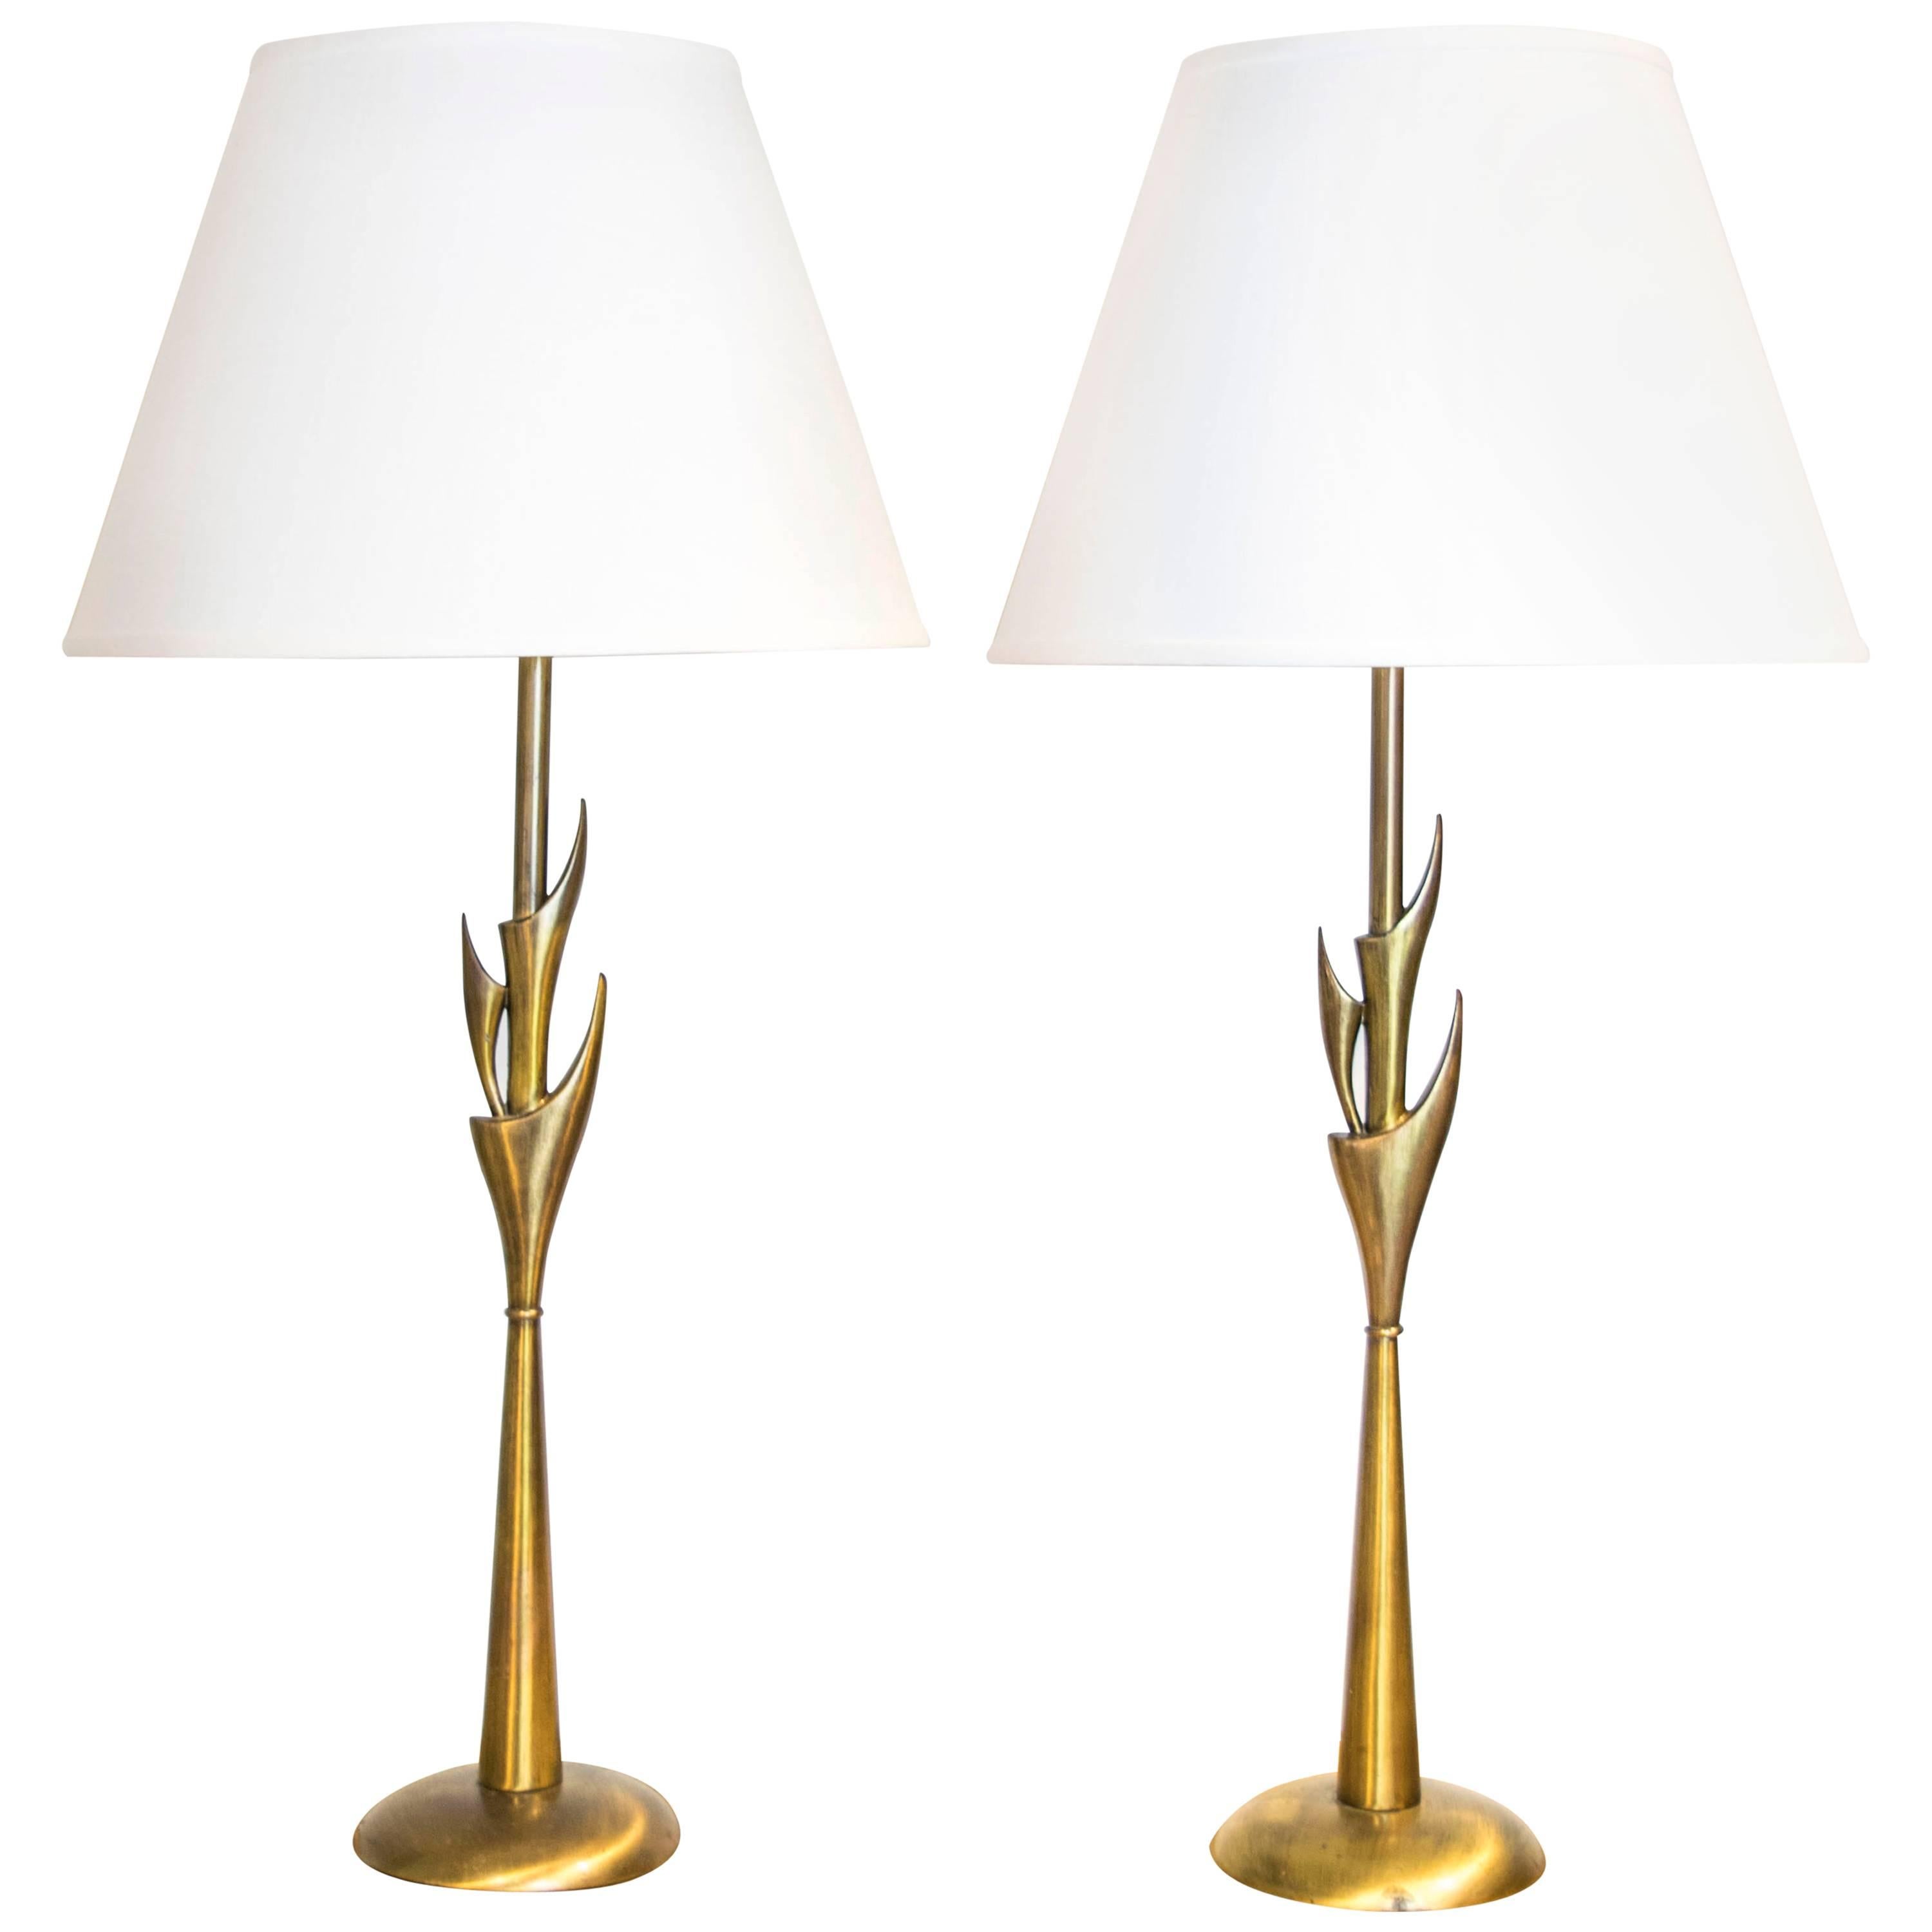 Rembrandt Torchiere Lamps with Antique Brass Finish For Sale